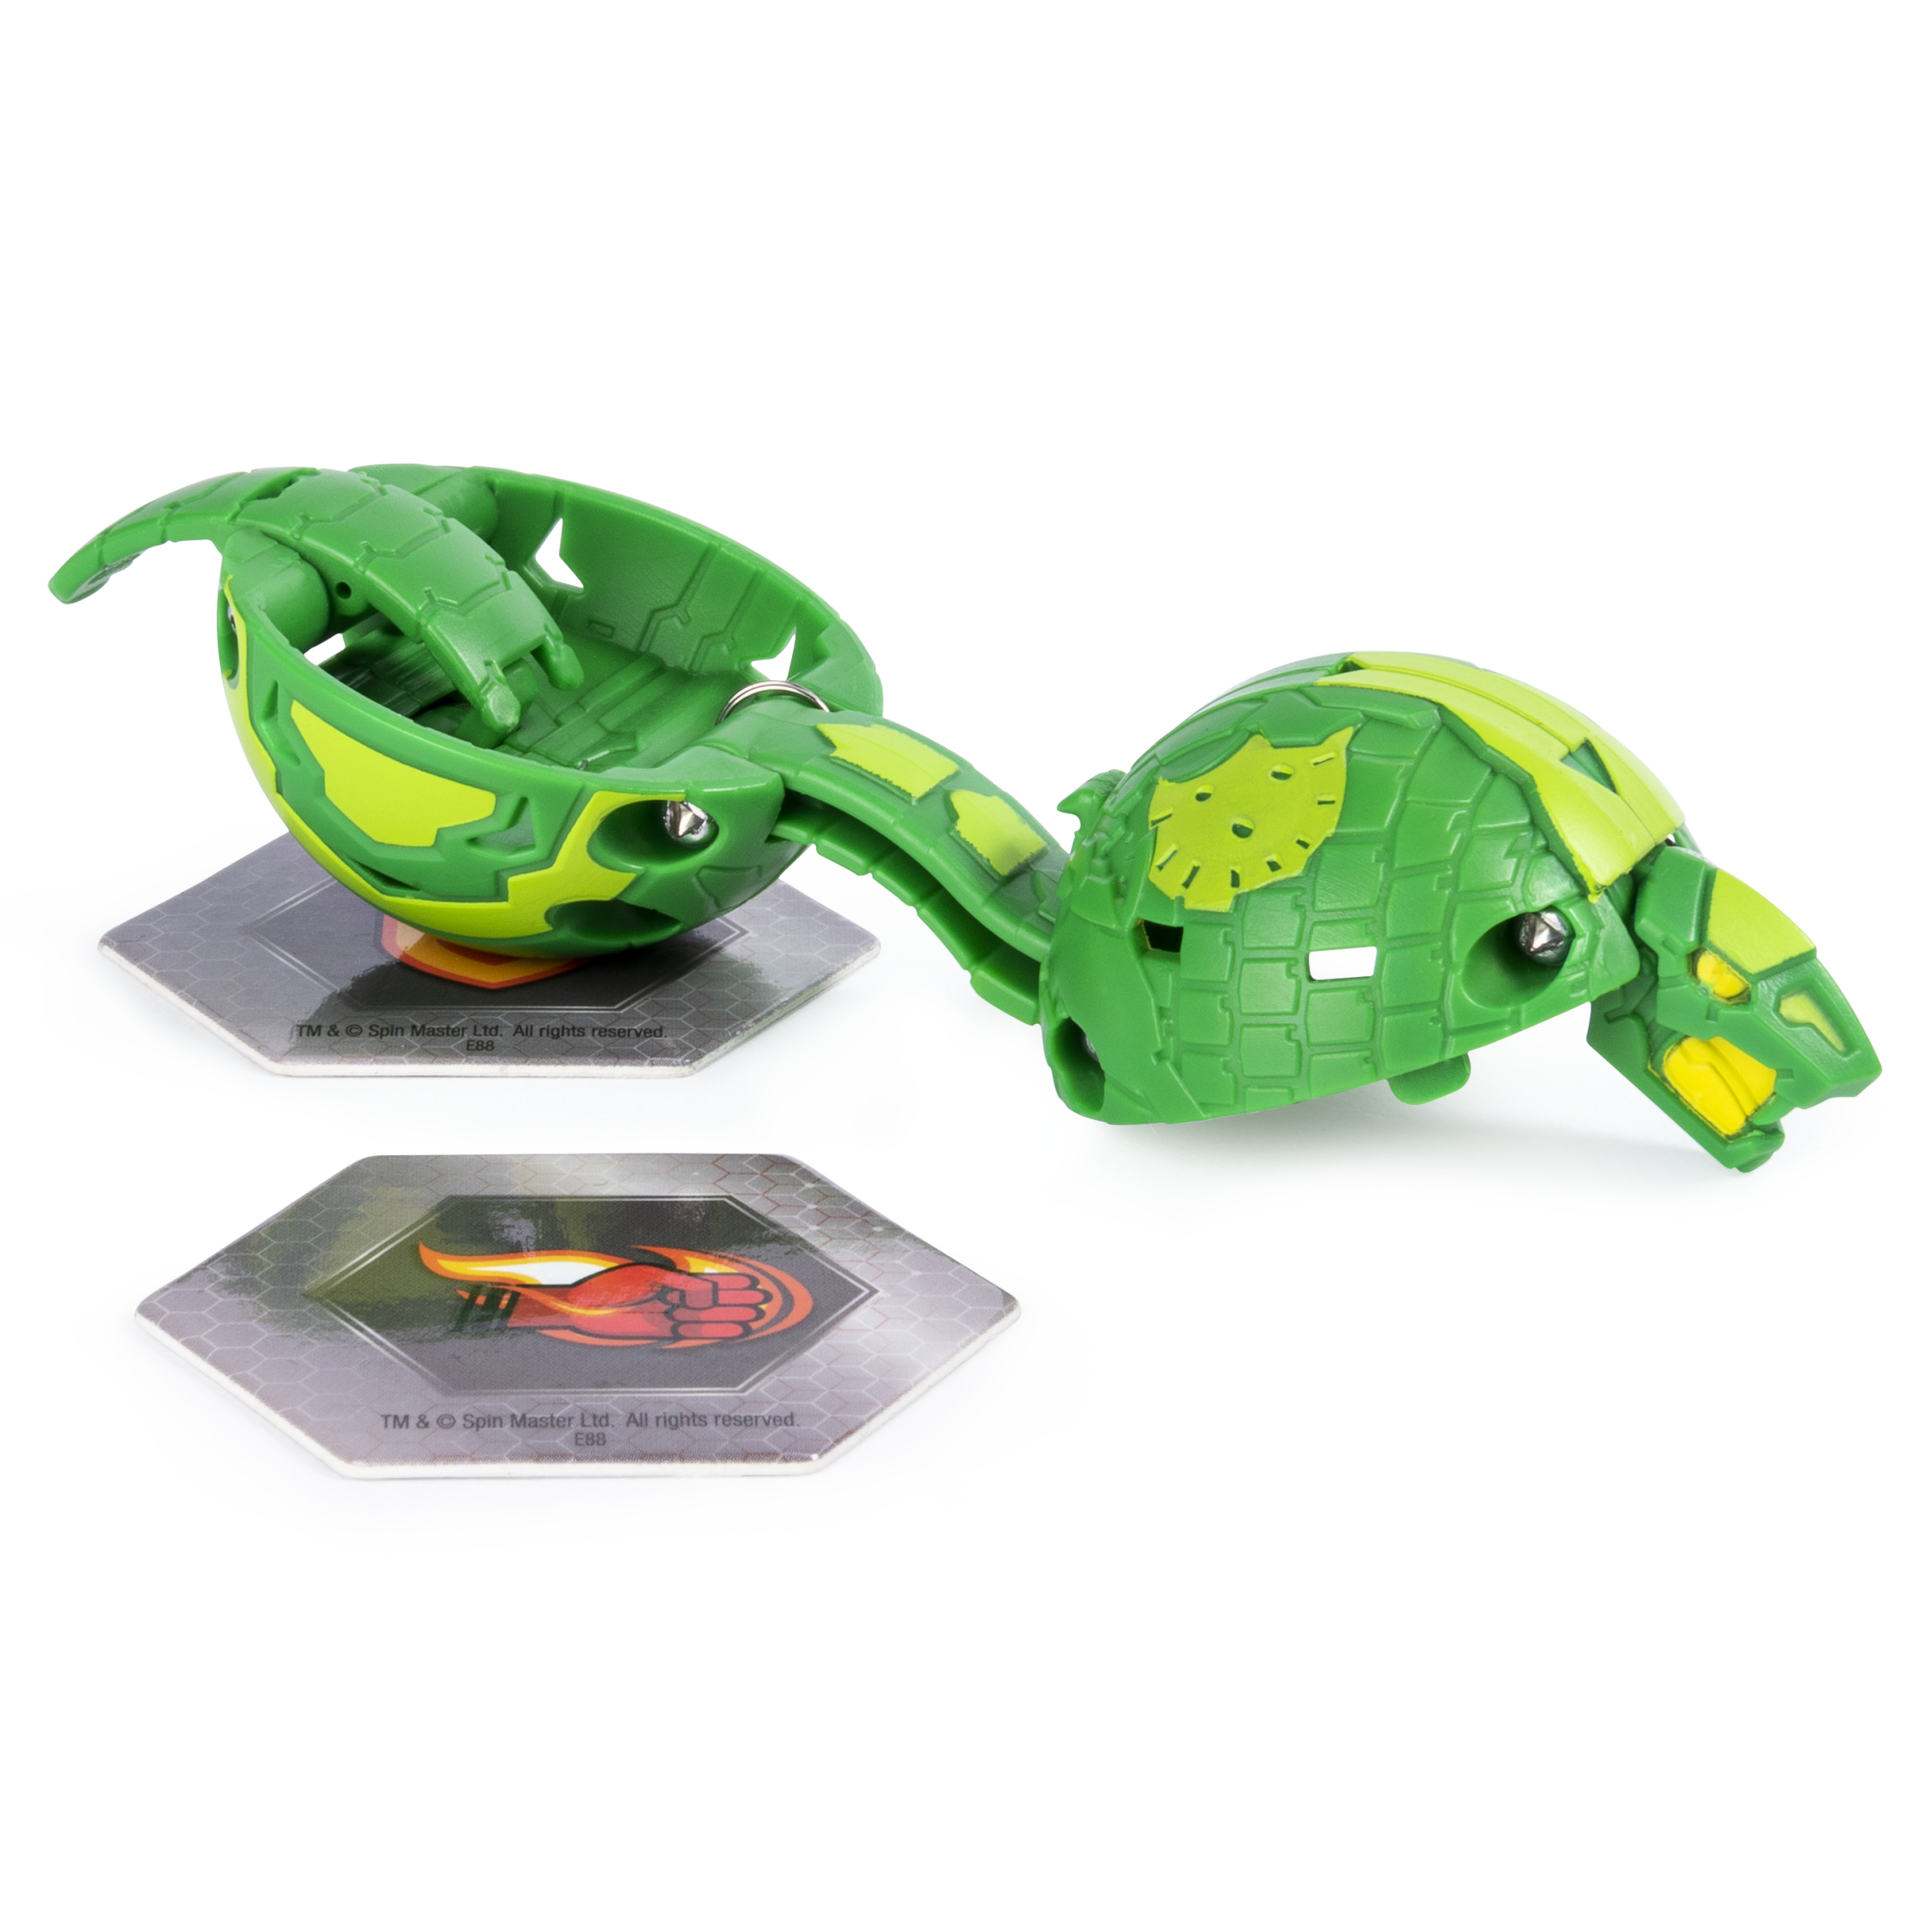 Bakugan, Ventus Fangzor, 2-inch Tall Collectible Action Figure and Trading Card, for Ages 6 and Up - image 3 of 5